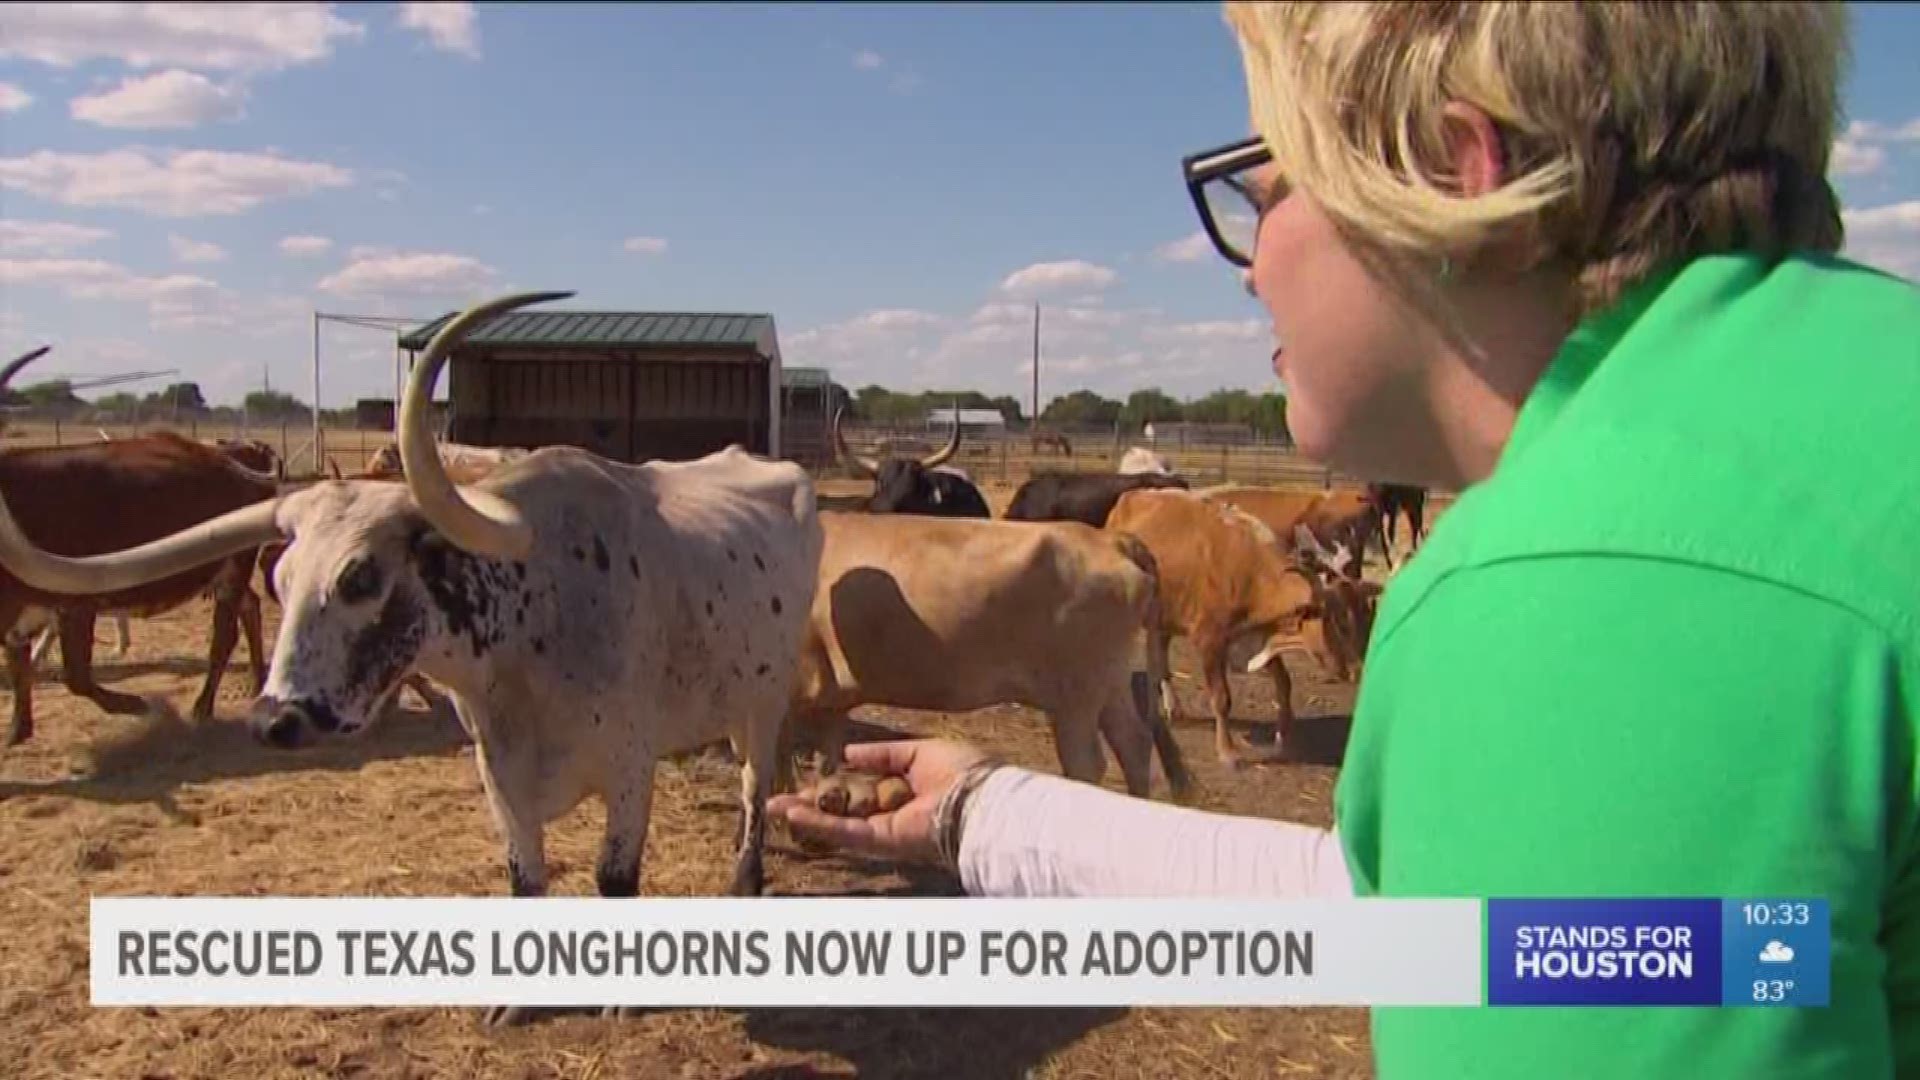 Looking for a pet? Some Texas longhorns are up for adoption!